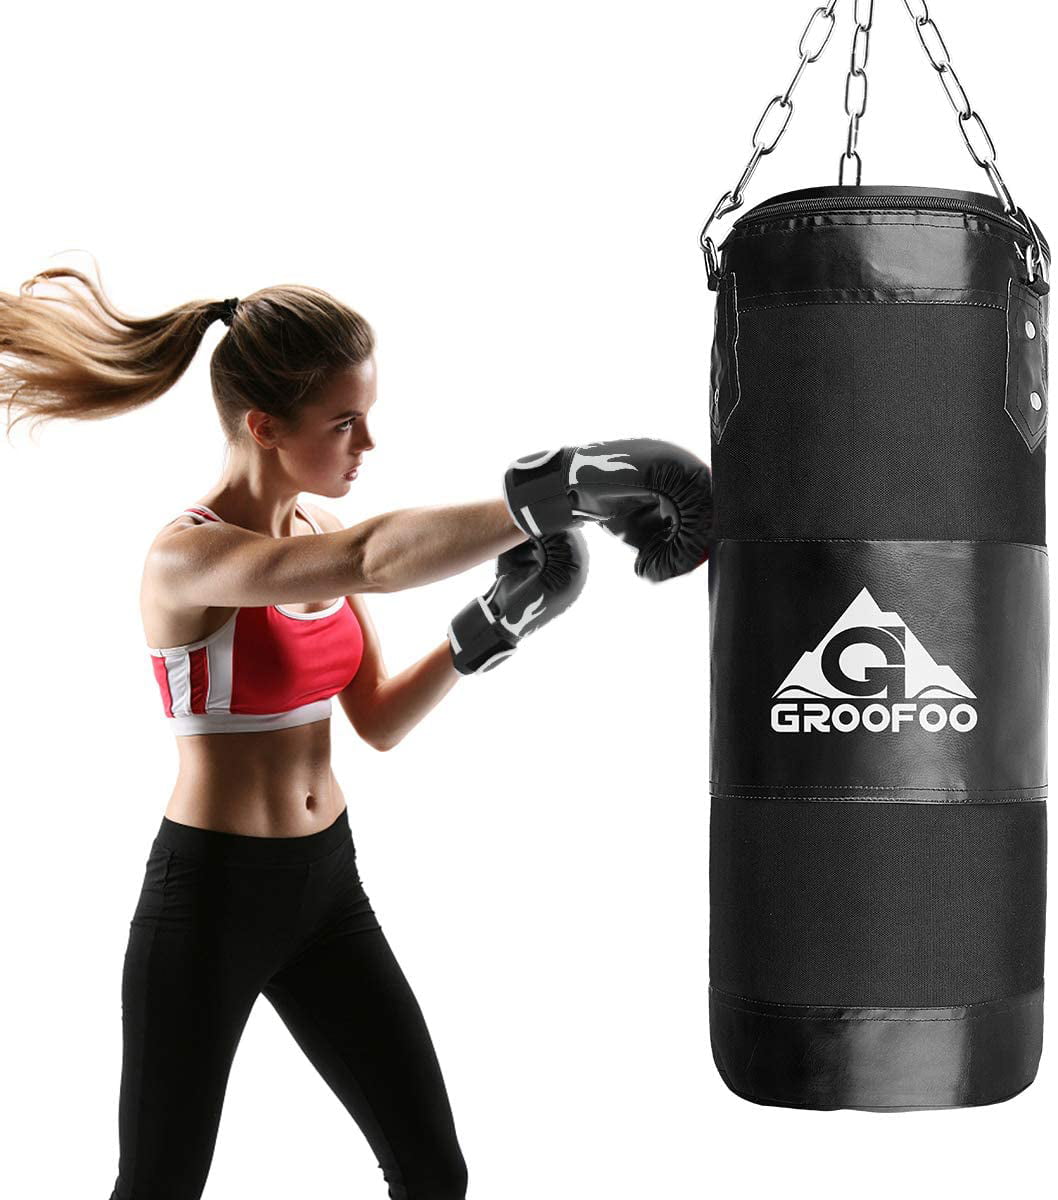 GROOFOO Kids Boxing Gloves for Child Punching Bag Sparring Training Age 3 to 10 Years